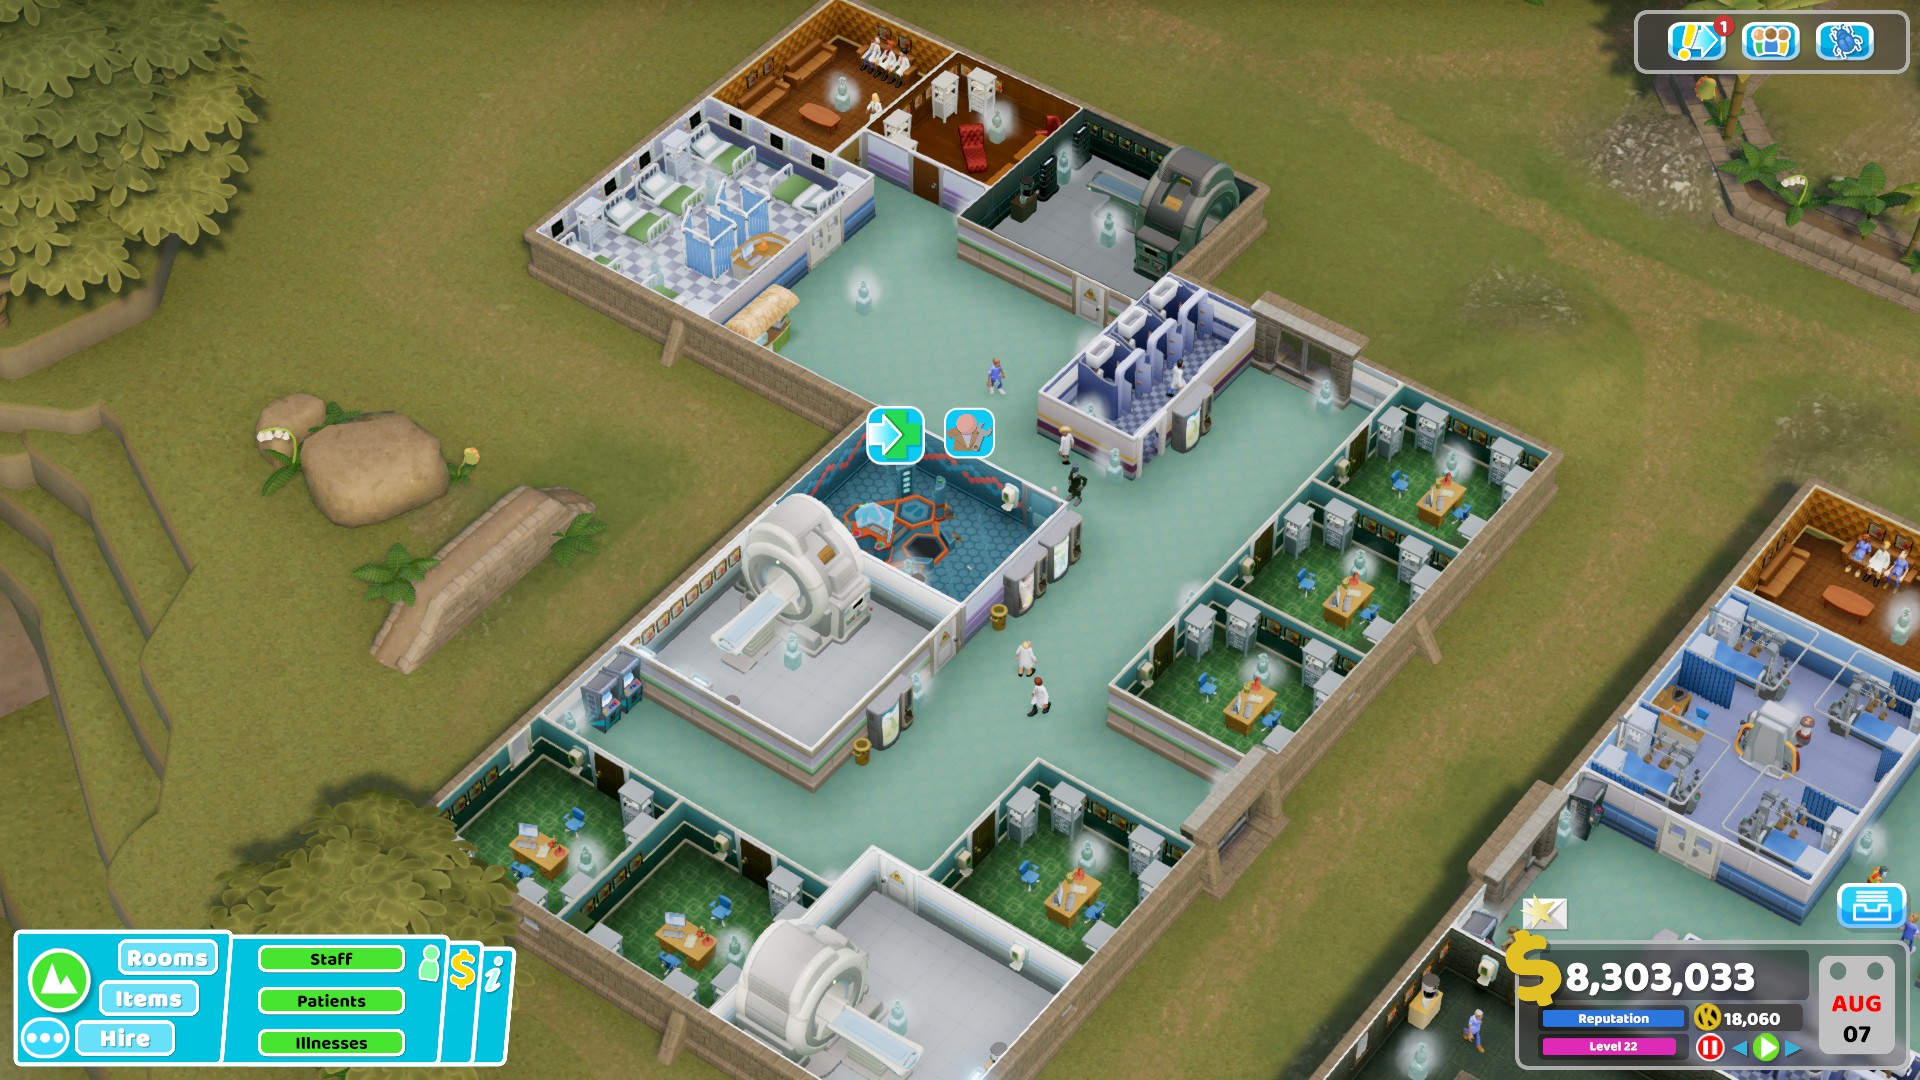 Two Point Hospital - How to Achieve 3 Stars to Complete Wave 42 Guide and Tips